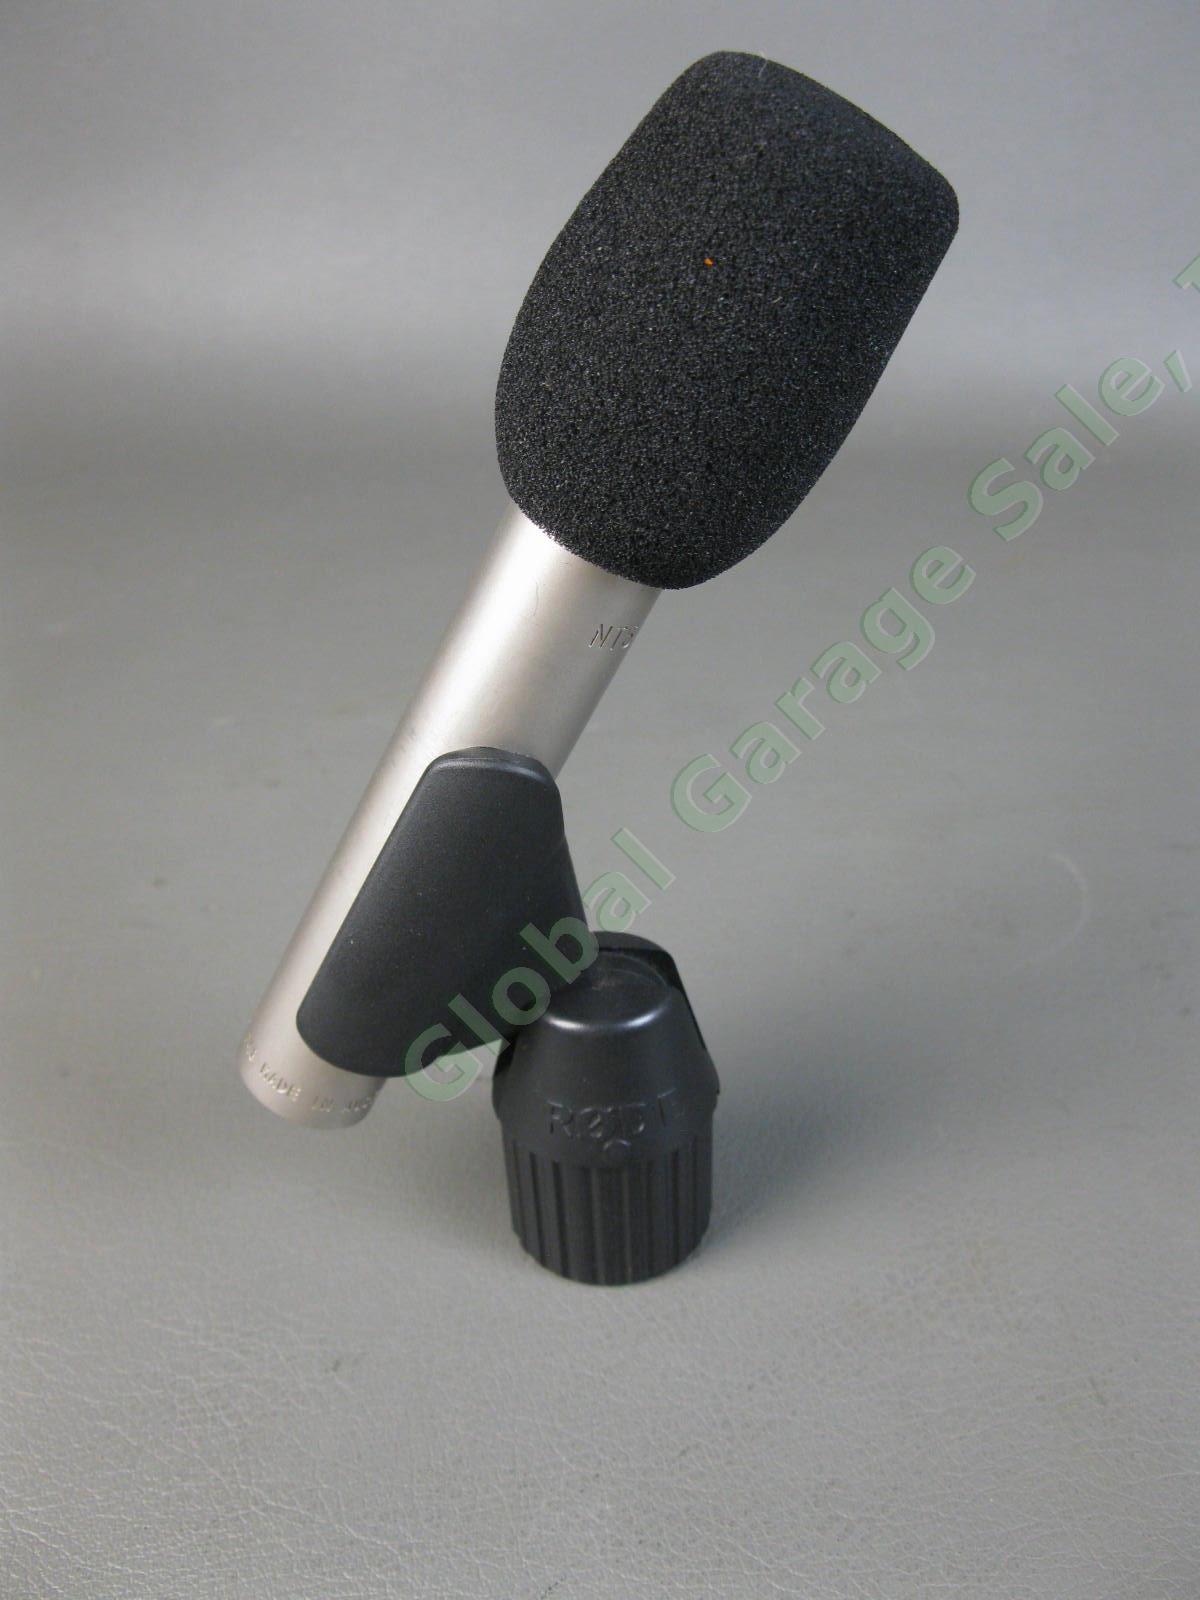 RODE NT5 Small Diaphragm Cardioid Condenser Instrument Microphone Pencil Mic 1